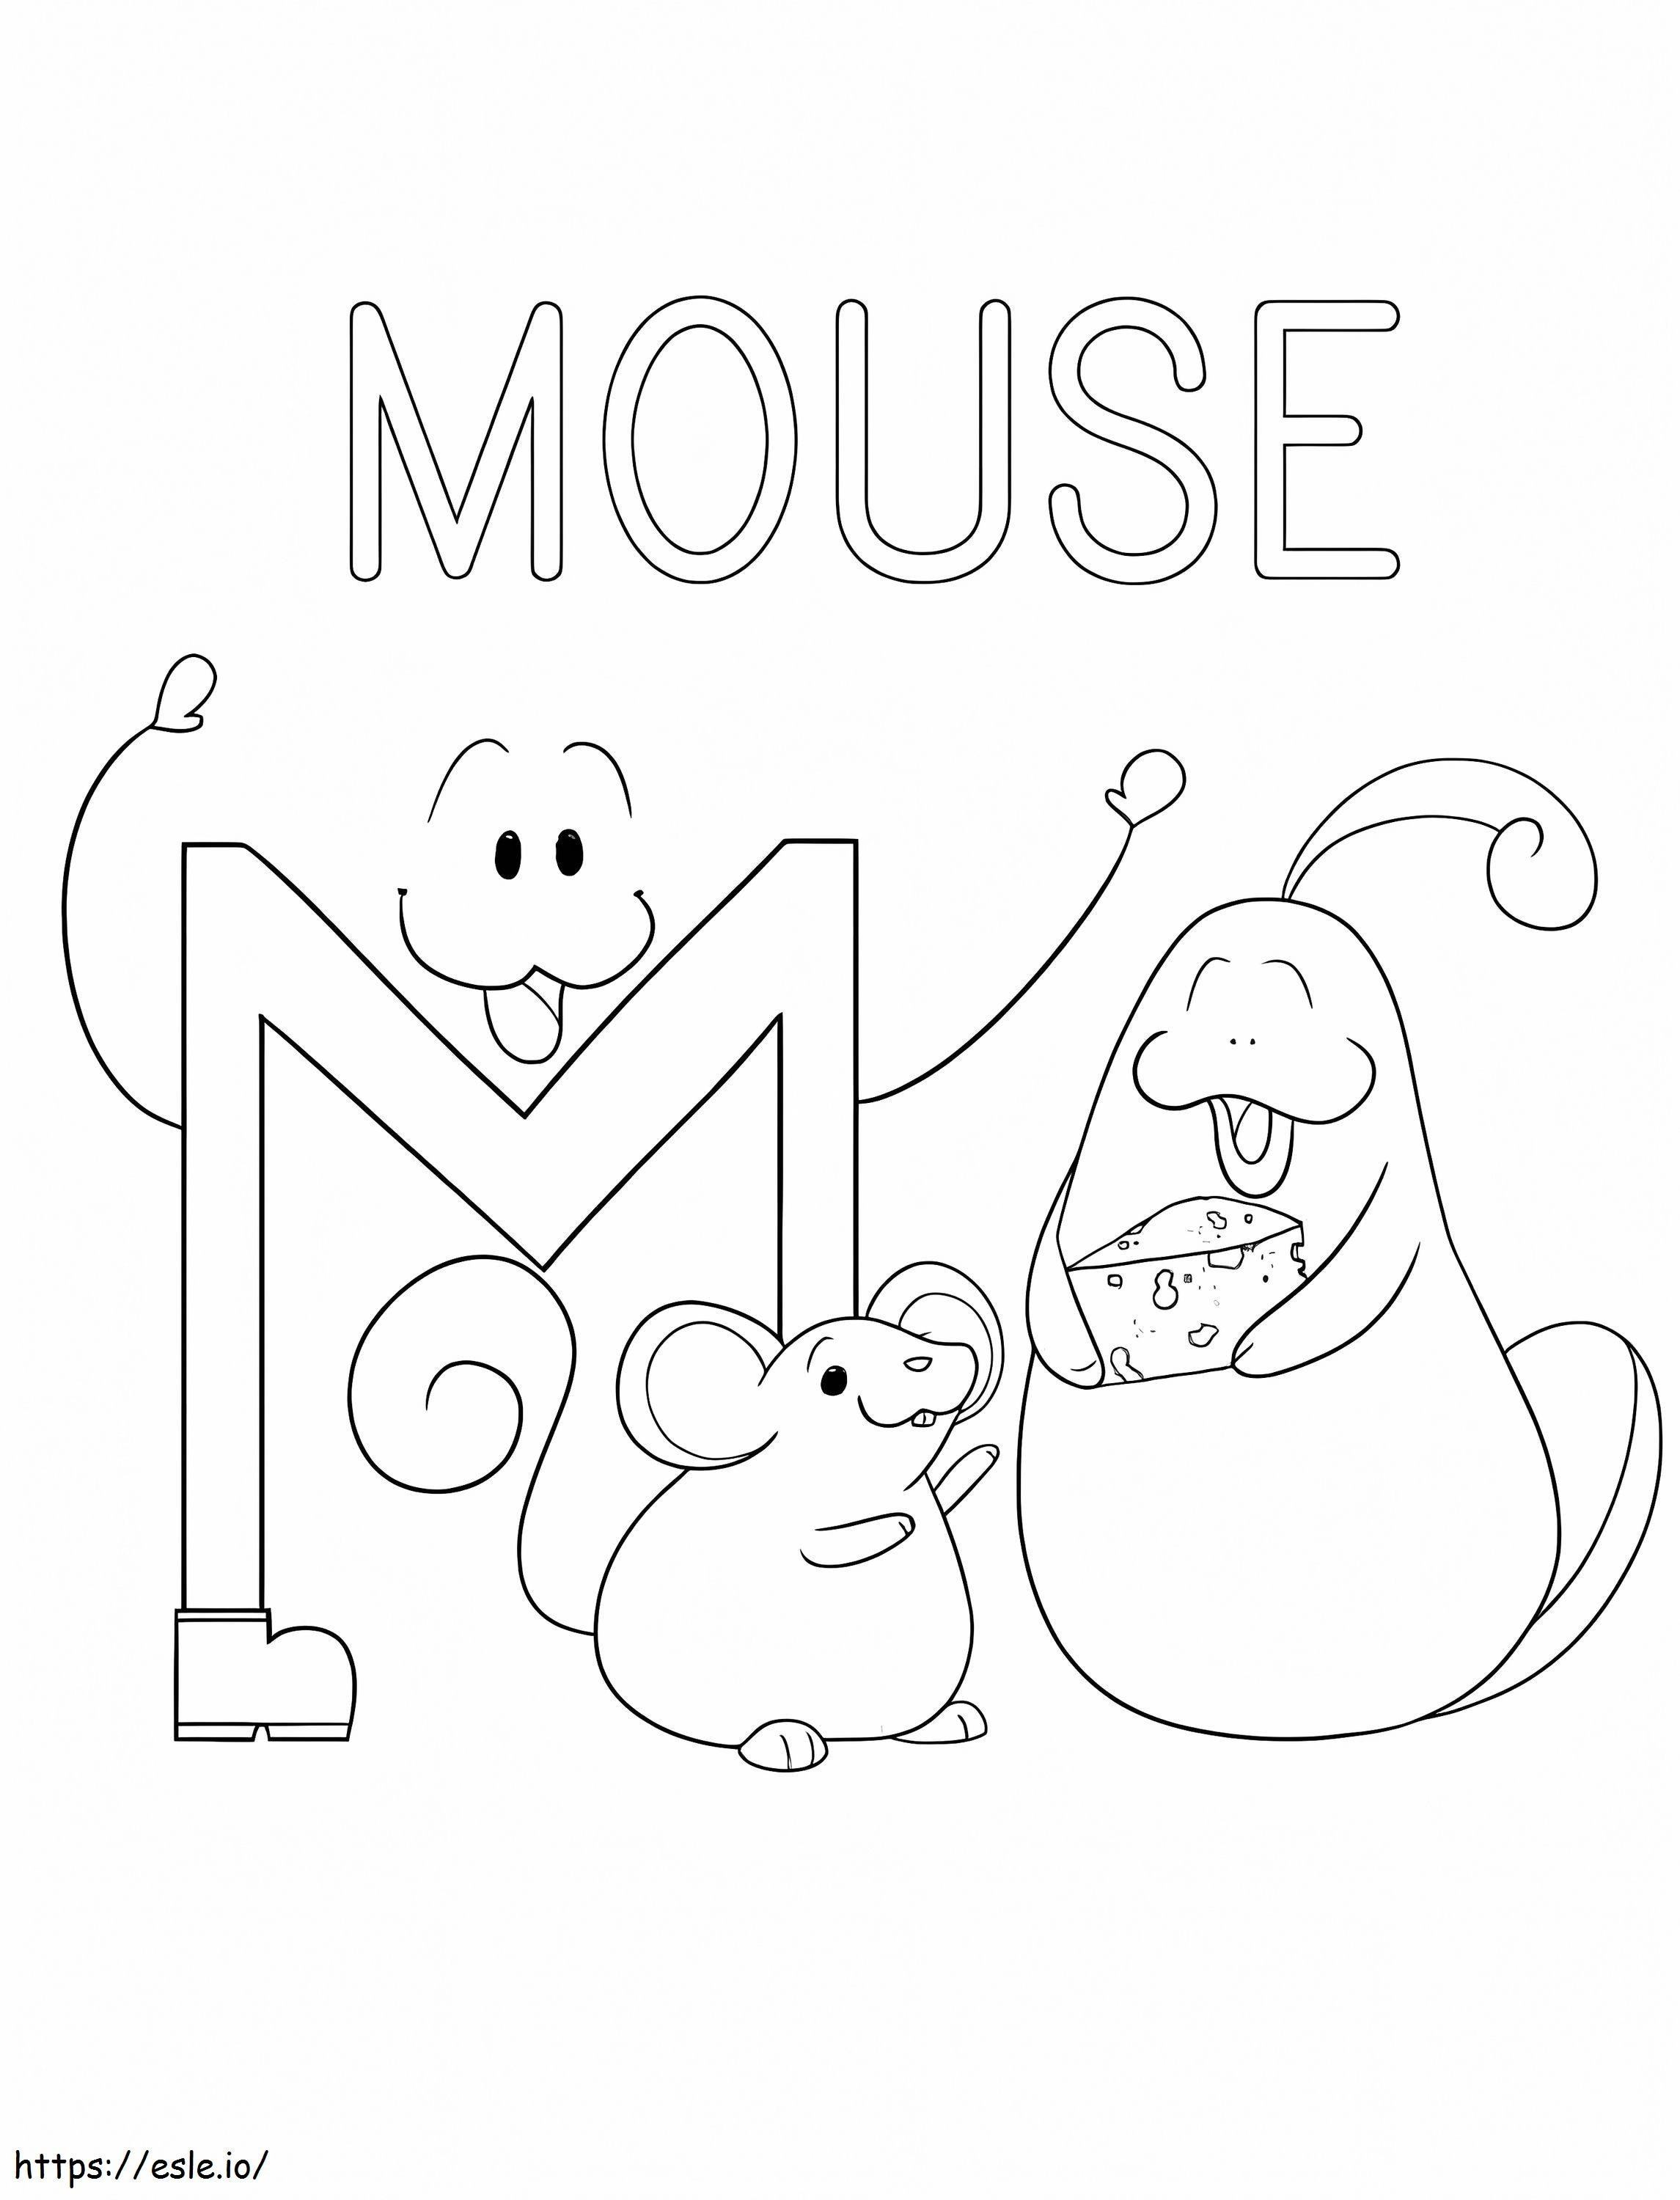 Happy Mouse Letter M coloring page